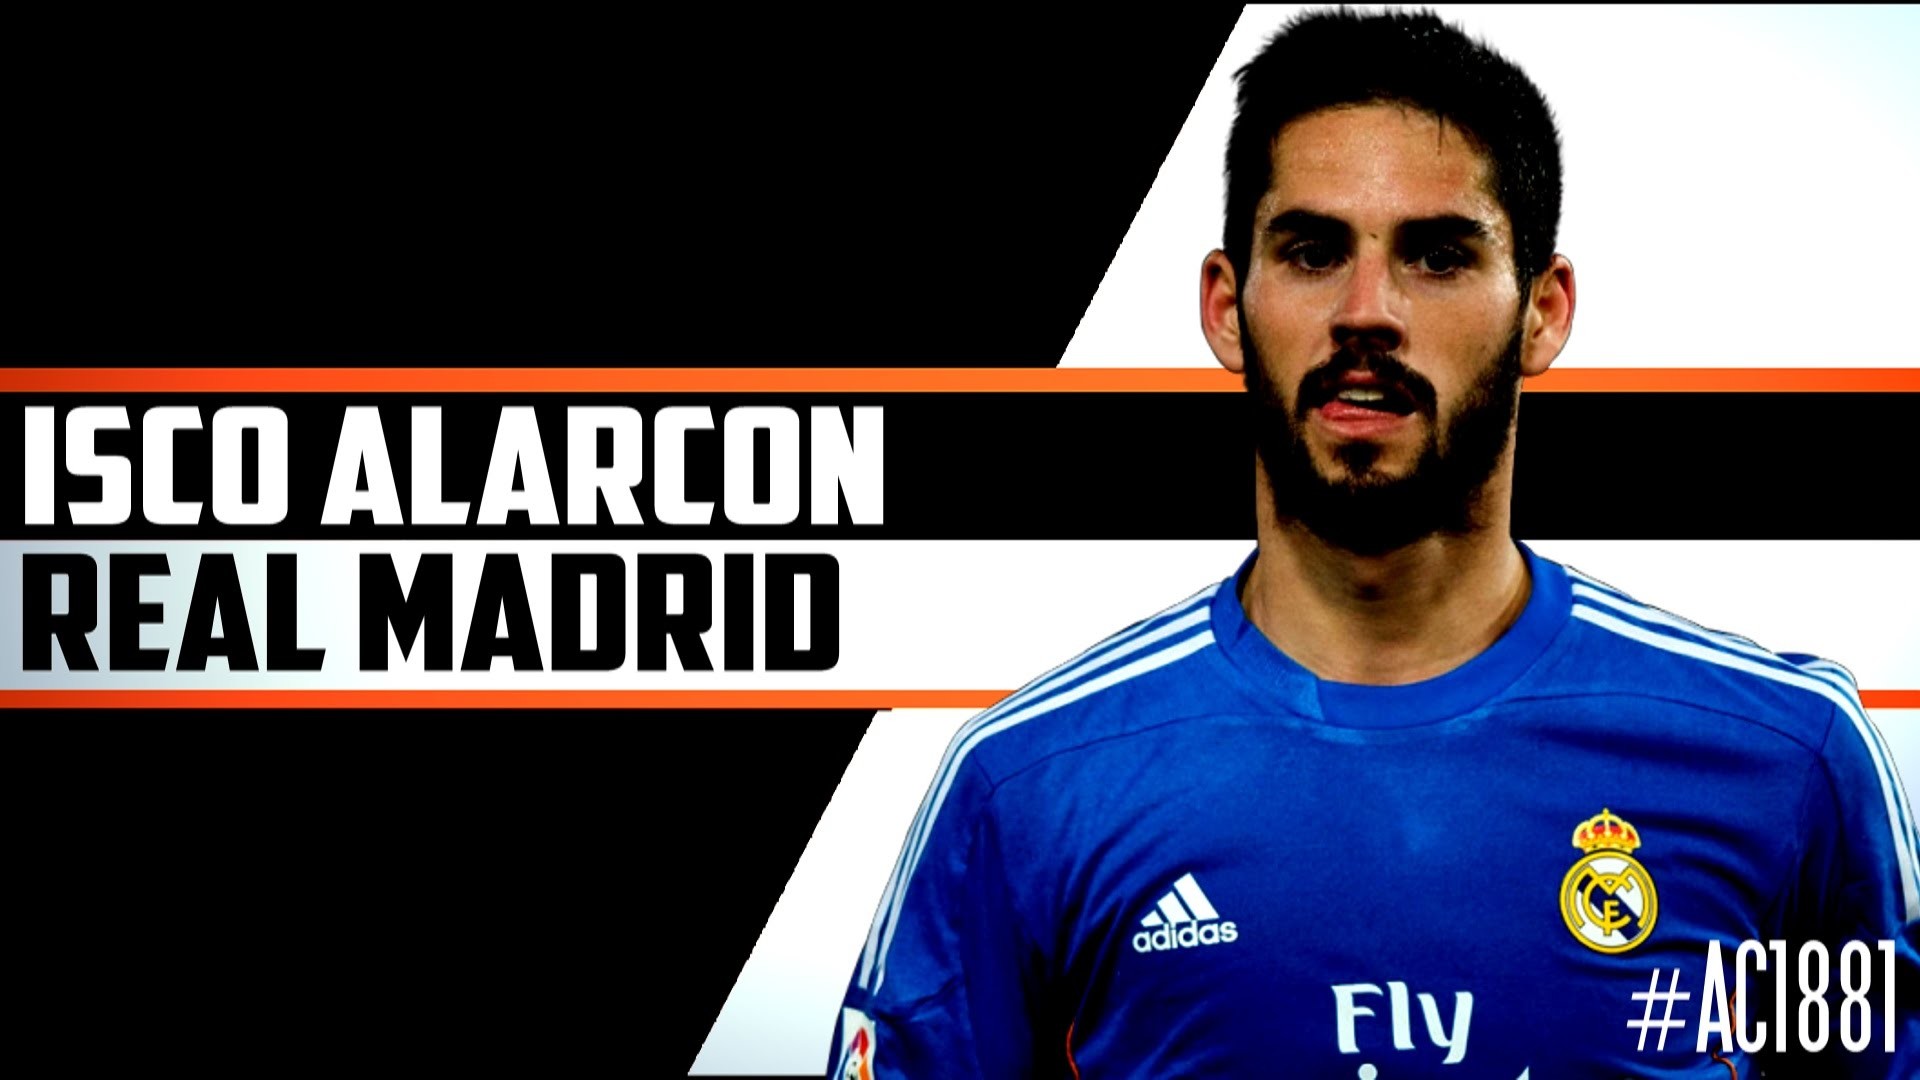 1920x1080 Isco AlarcÃ³n - Control, Vision & Flair | Ultimate Compilation (2013/14) HD  - YouTube